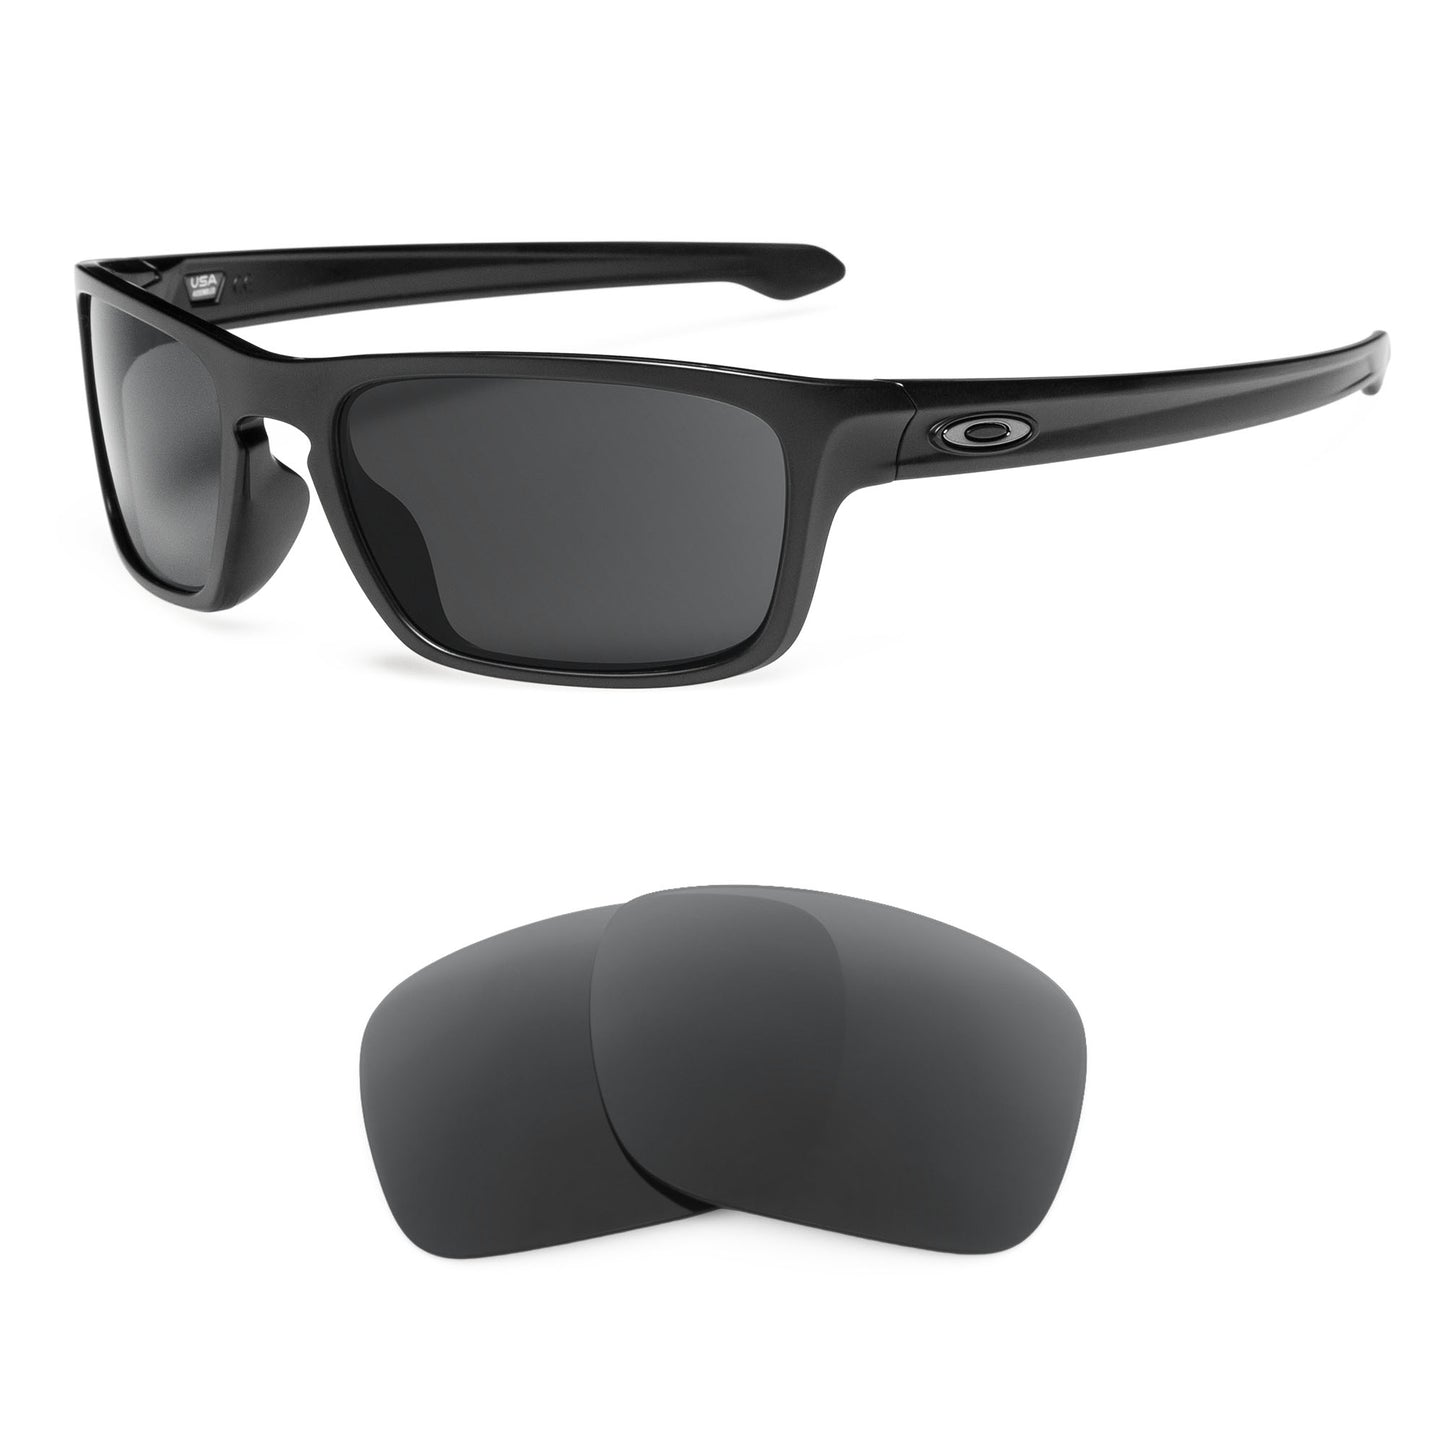 Oakley Sliver Stealth sunglasses with replacement lenses